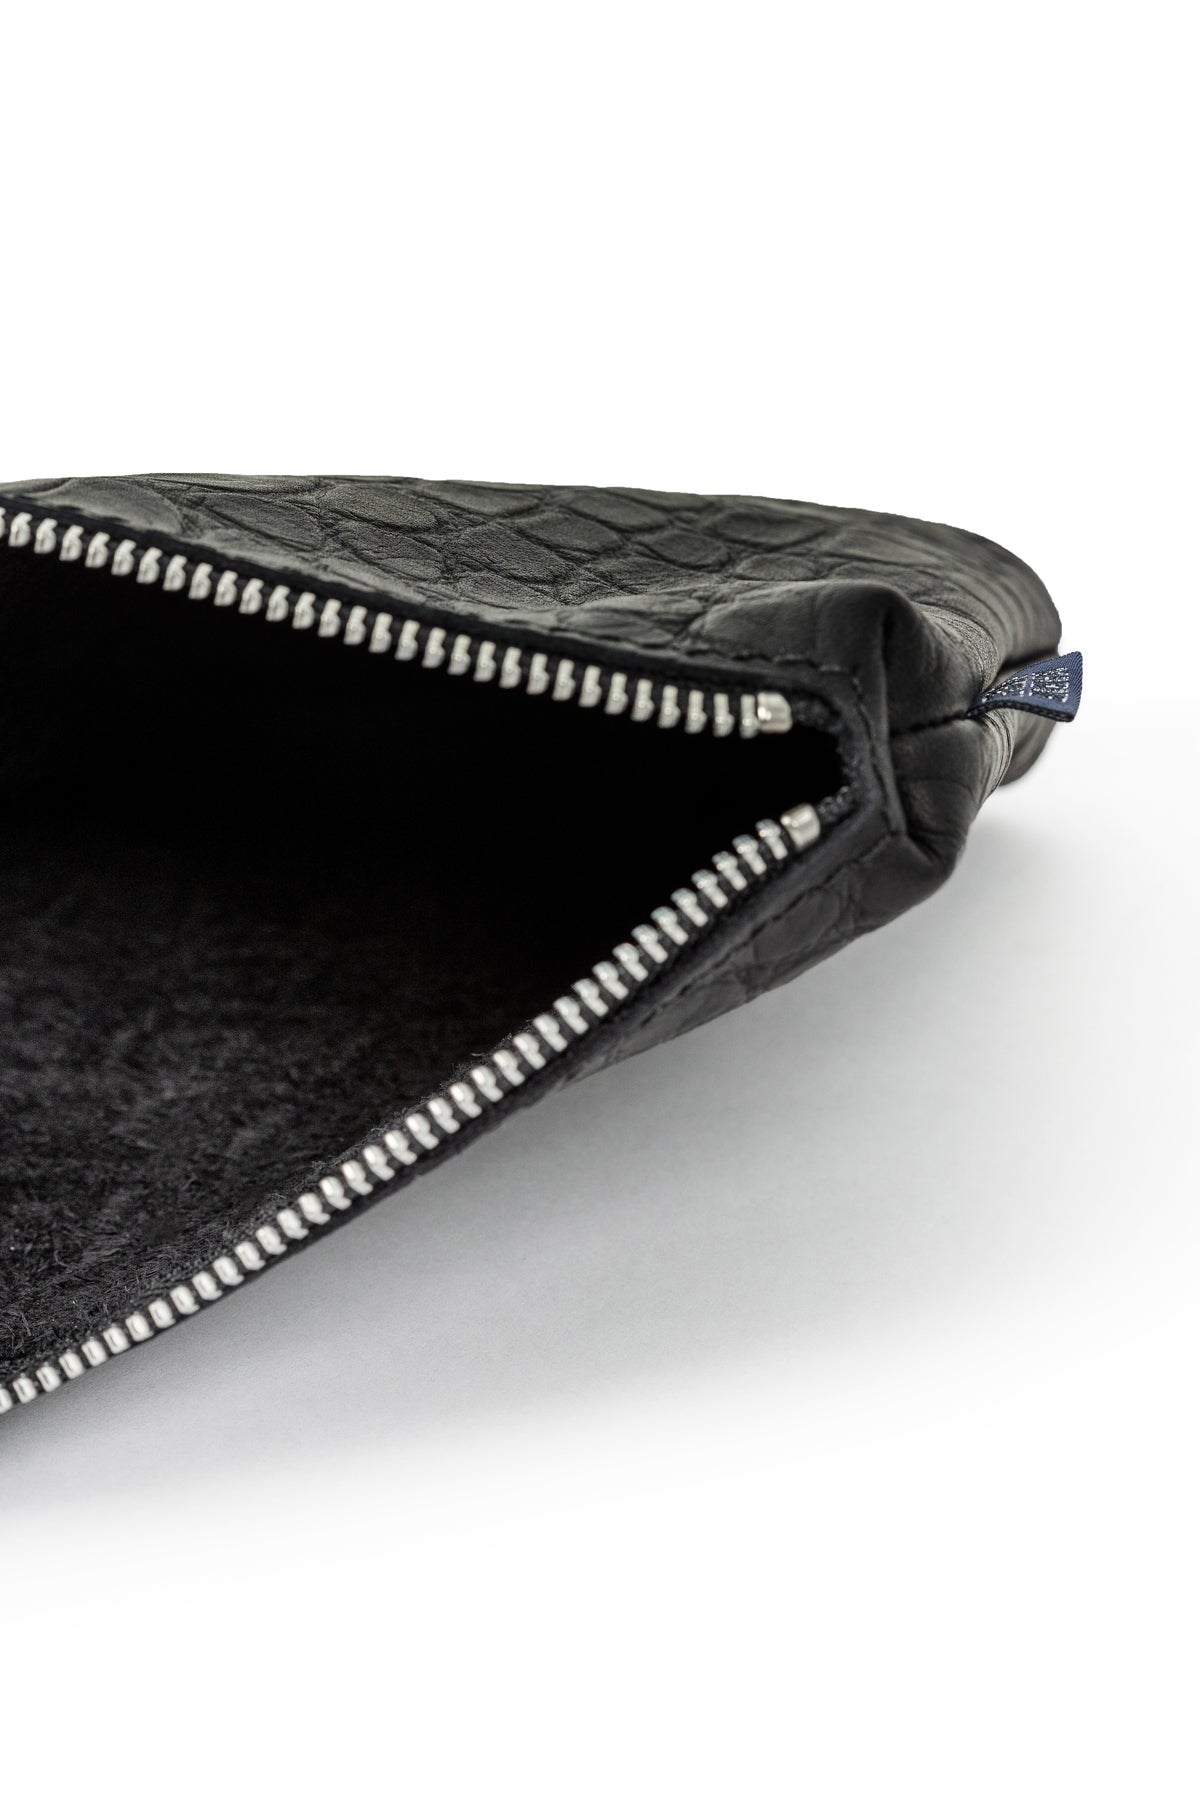 THE REVIVAL COLLECTION: Slim Clutch